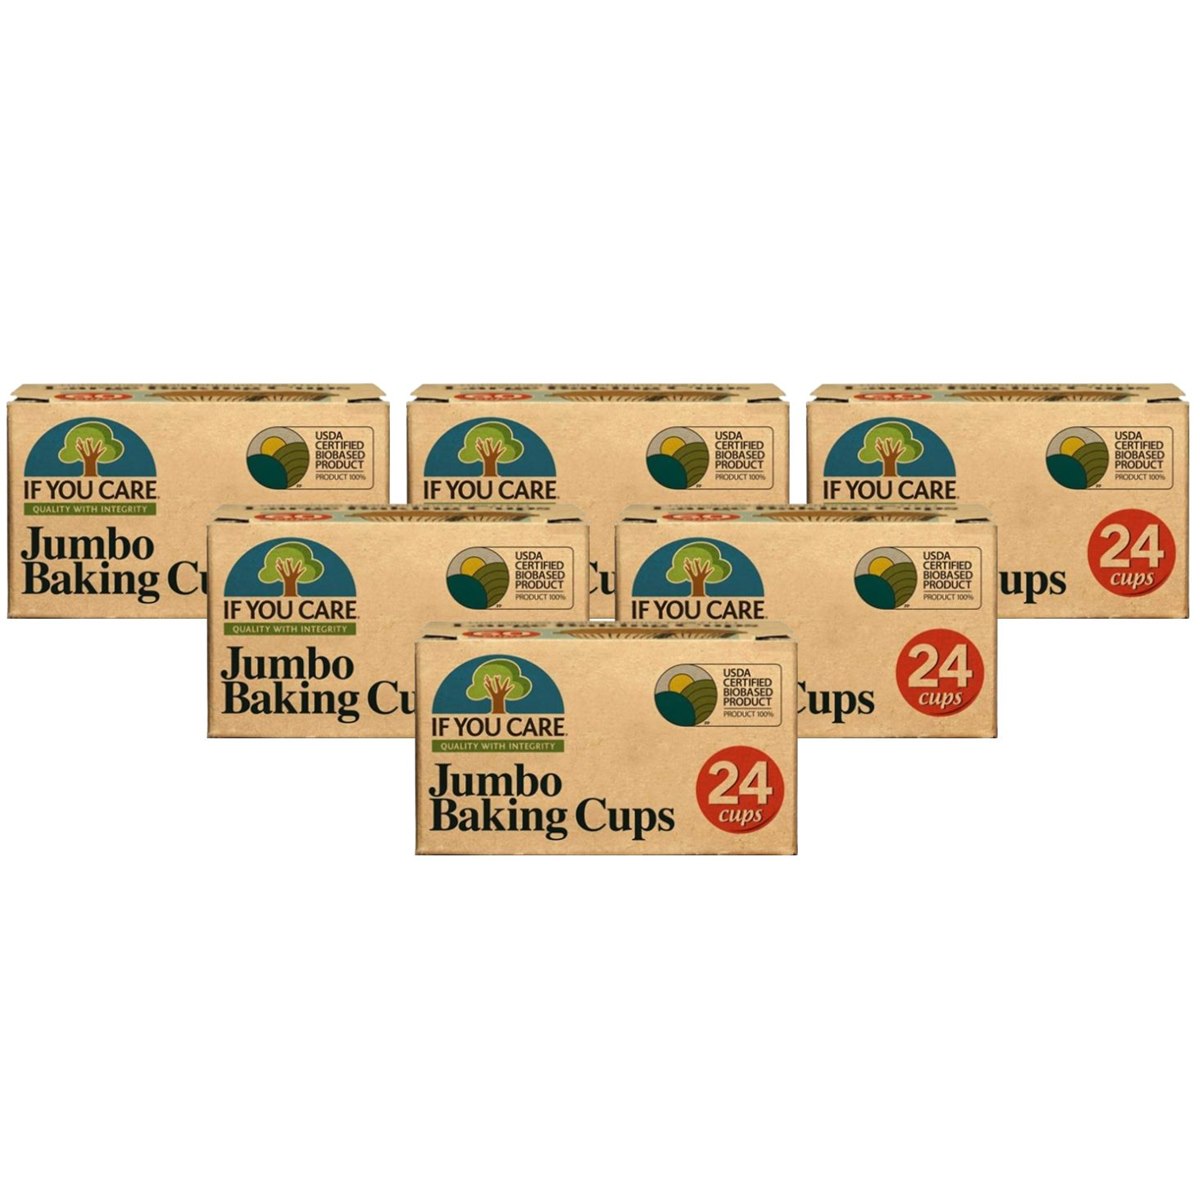 Case of 6 x If You Care Jumbo Baking Cups Pack of 24